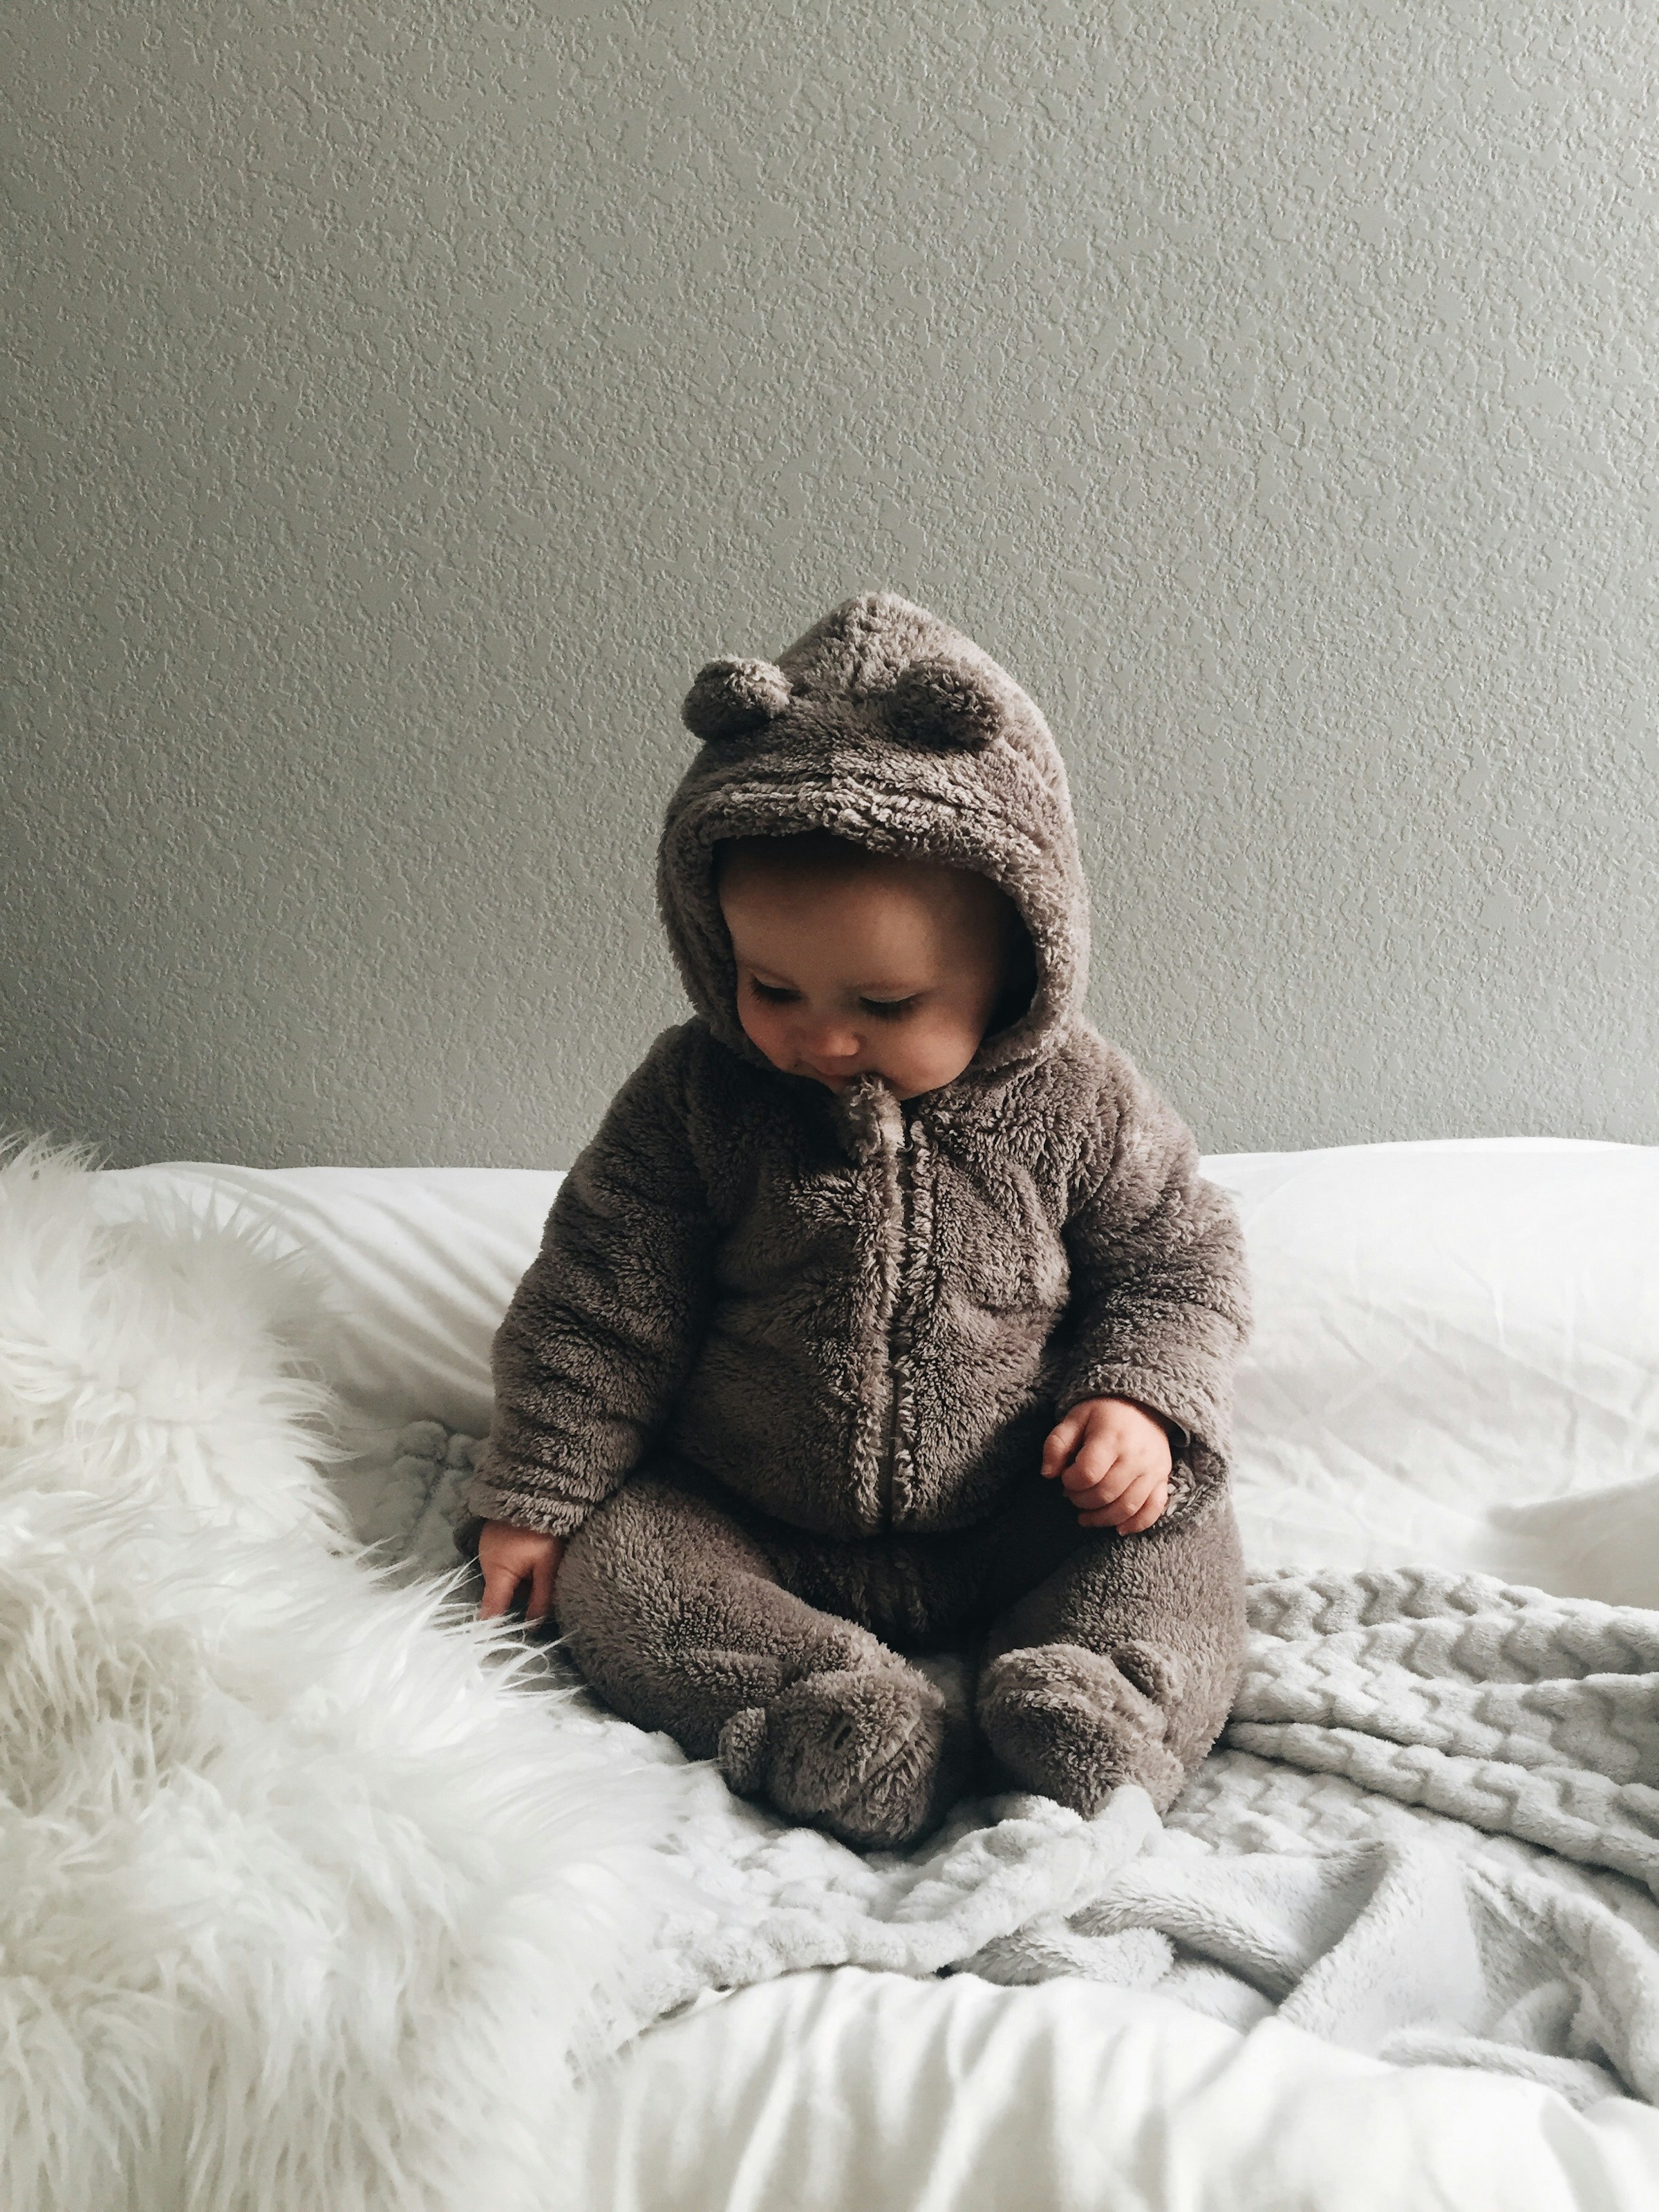 A cute baby sitting on the bed | Source: Unsplash